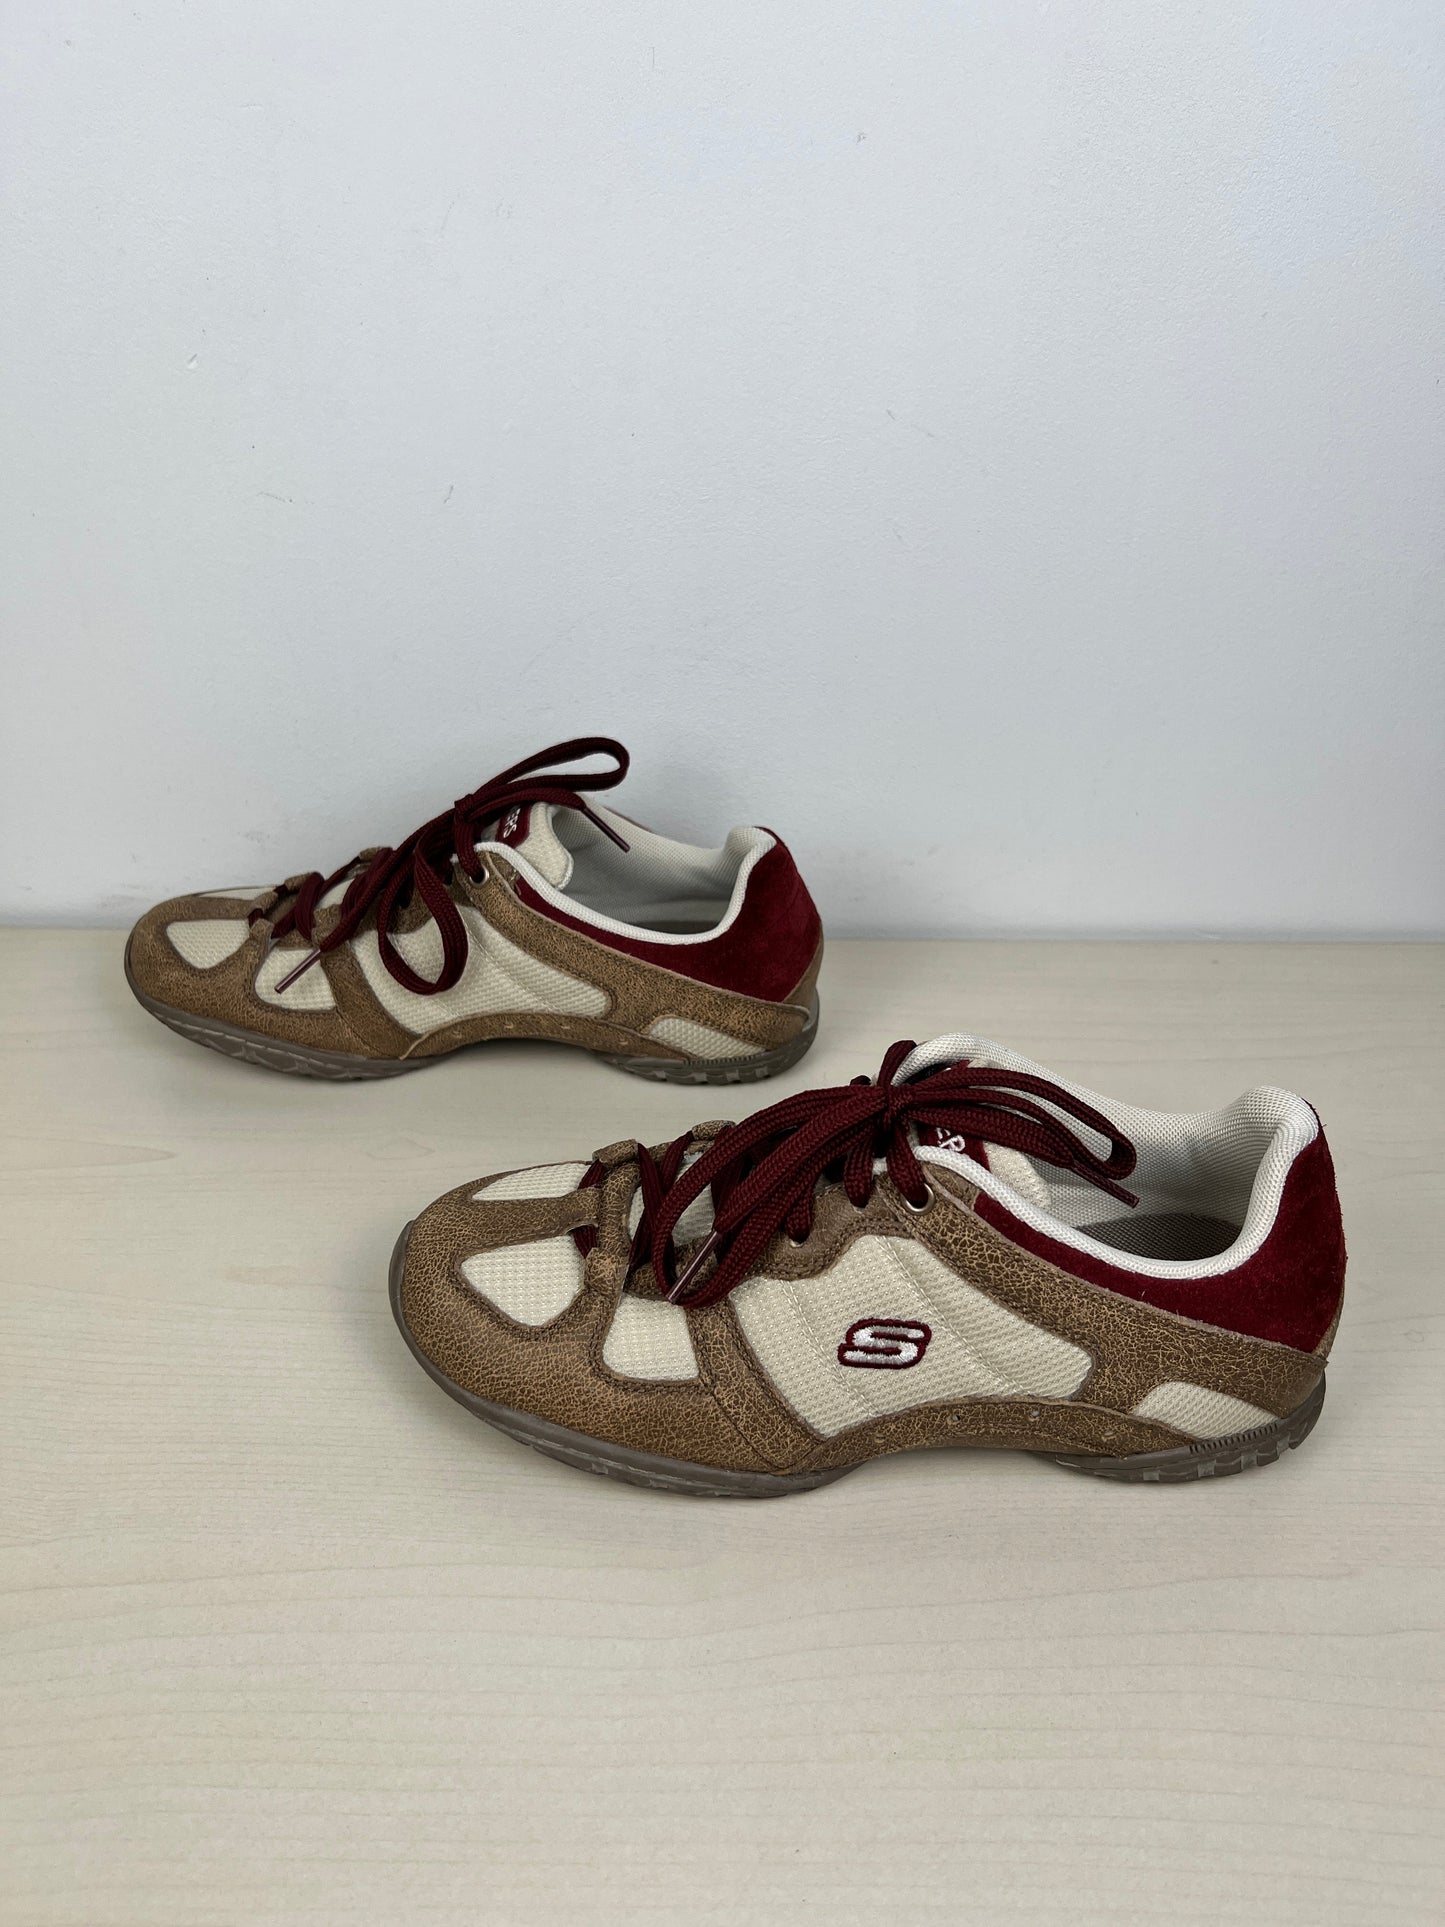 Brown Shoes Athletic Skechers, Size 6.5